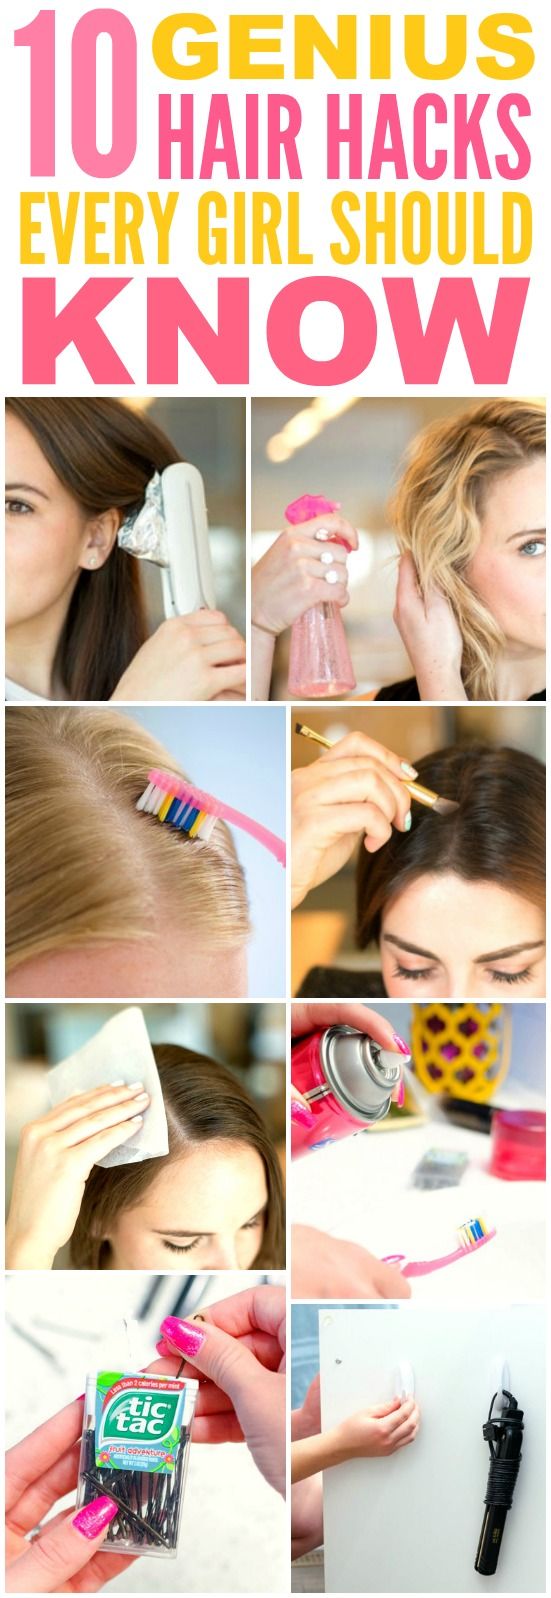 These 10 genius hair hacks every girl should know are THE BEST! I'm so glad ...